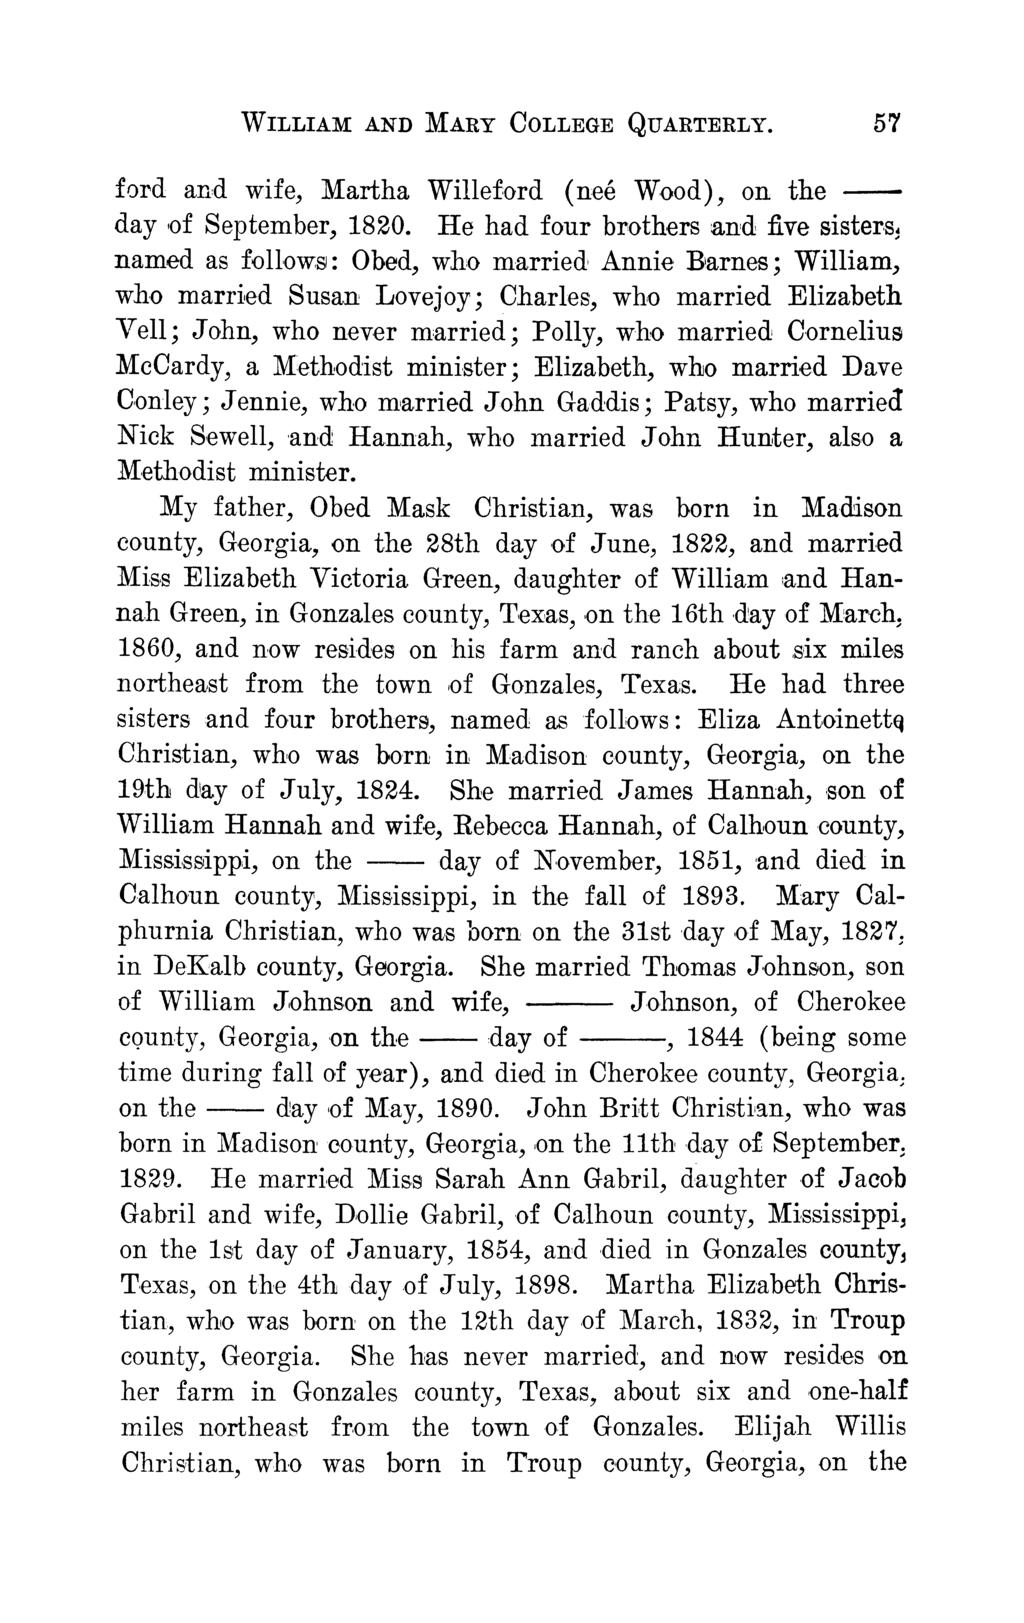 WILLIAM AND MARY COLLEGE QUARTERLY. 57 ford and wife, Martha Willeford (nee Wood), on the day of September, 1820.